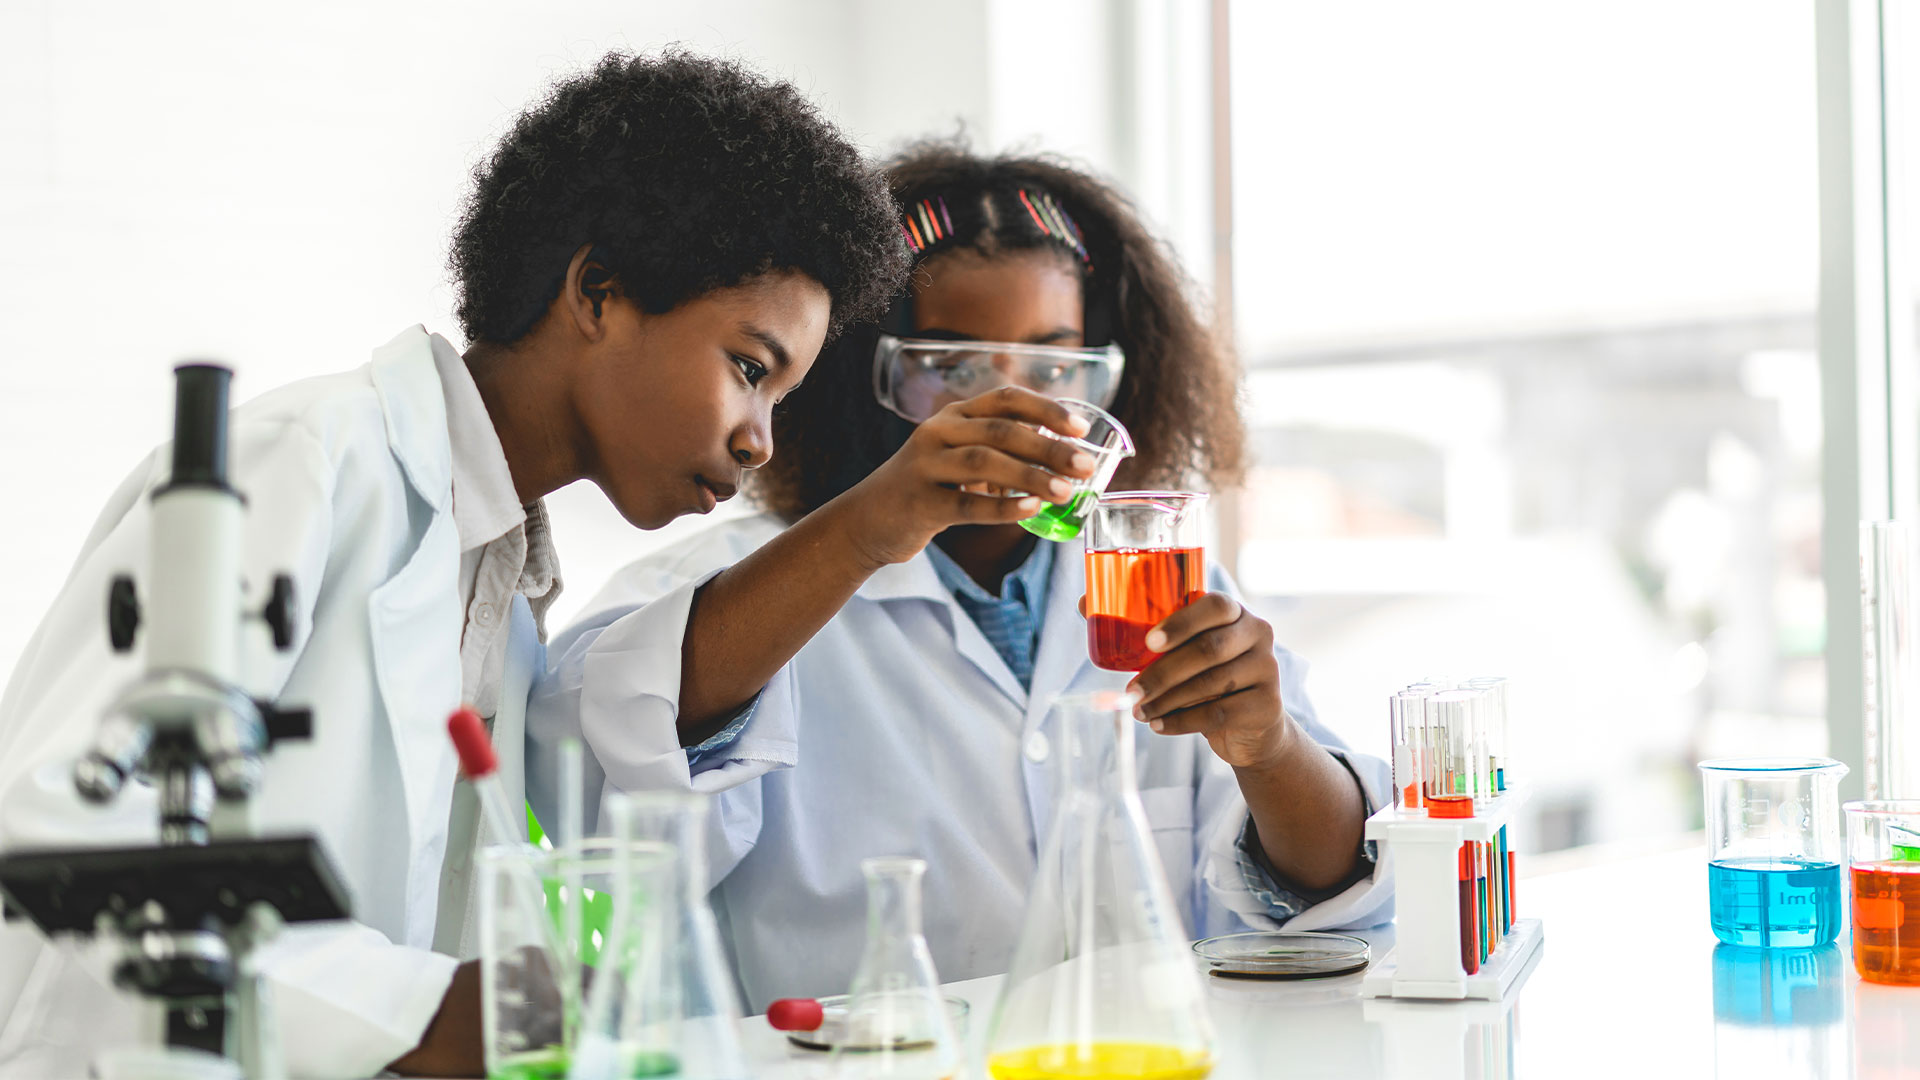 Young students conducting science experiment